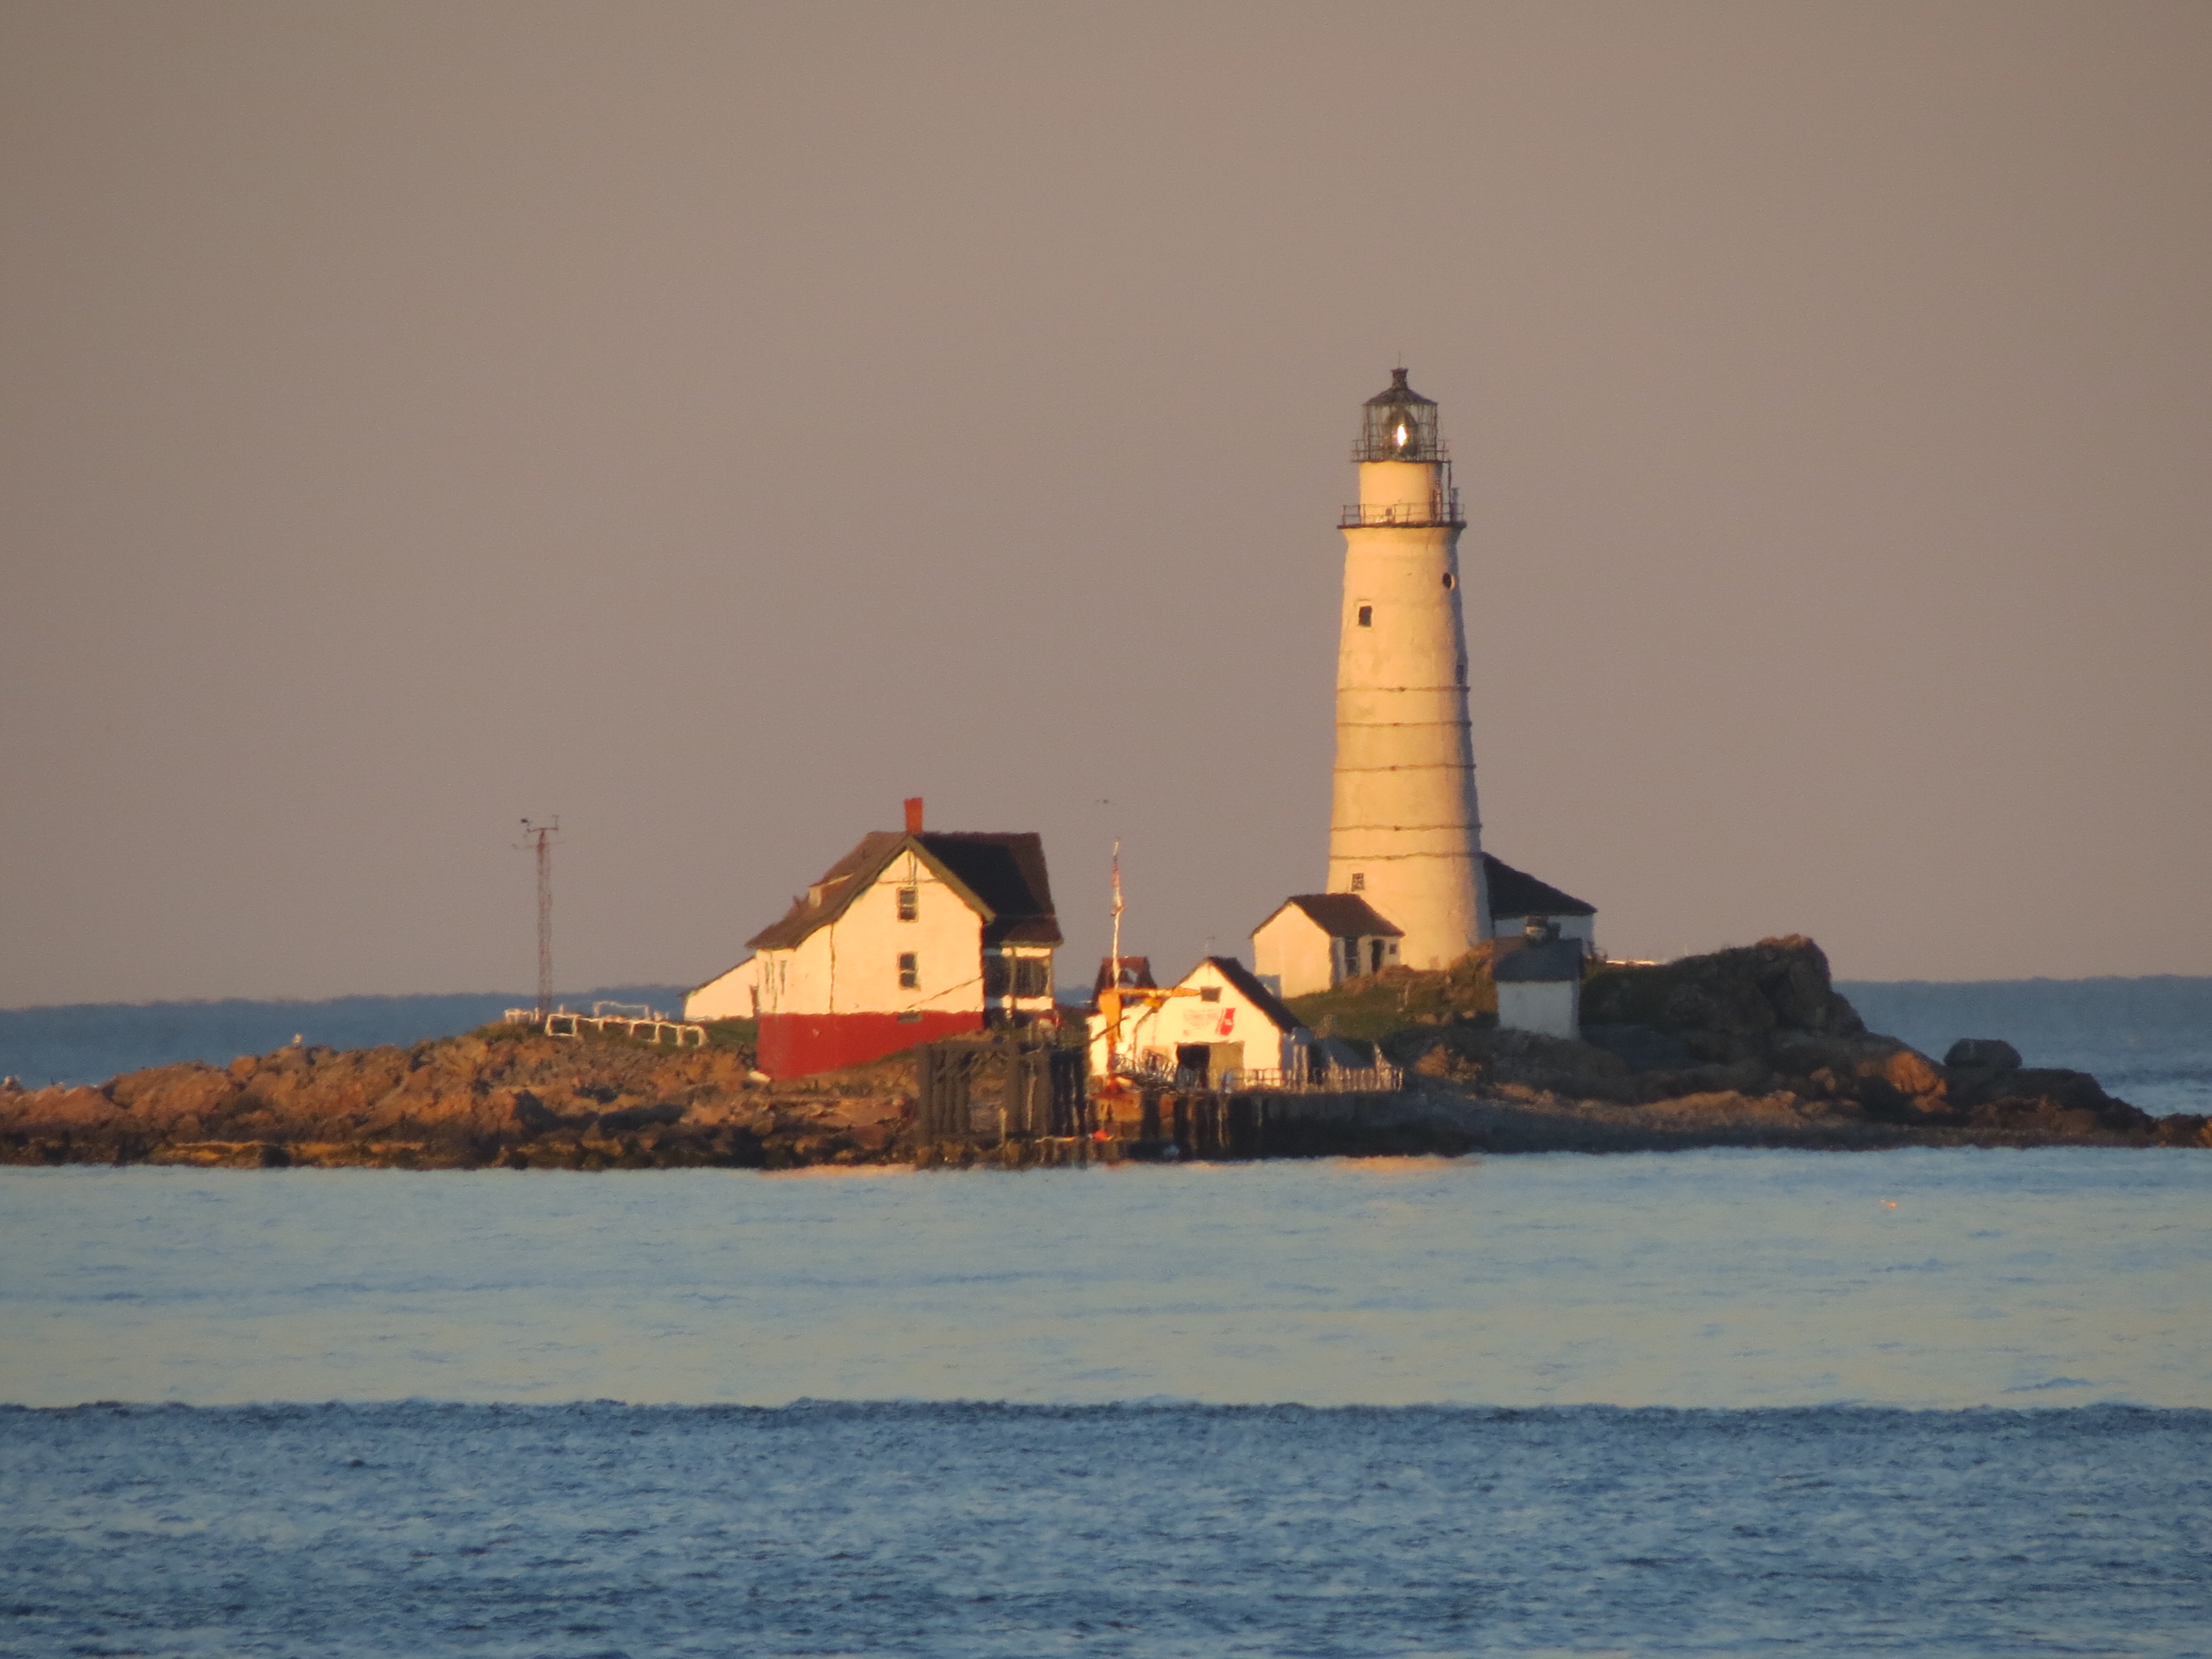 In 1964 Boston Light became a National Historic Landmark, and in 1987 it was listed on the National Register of Historic Places. Image by MBTafan2011. Licensed under CC BY 3.0 via Wikimedia Commons.